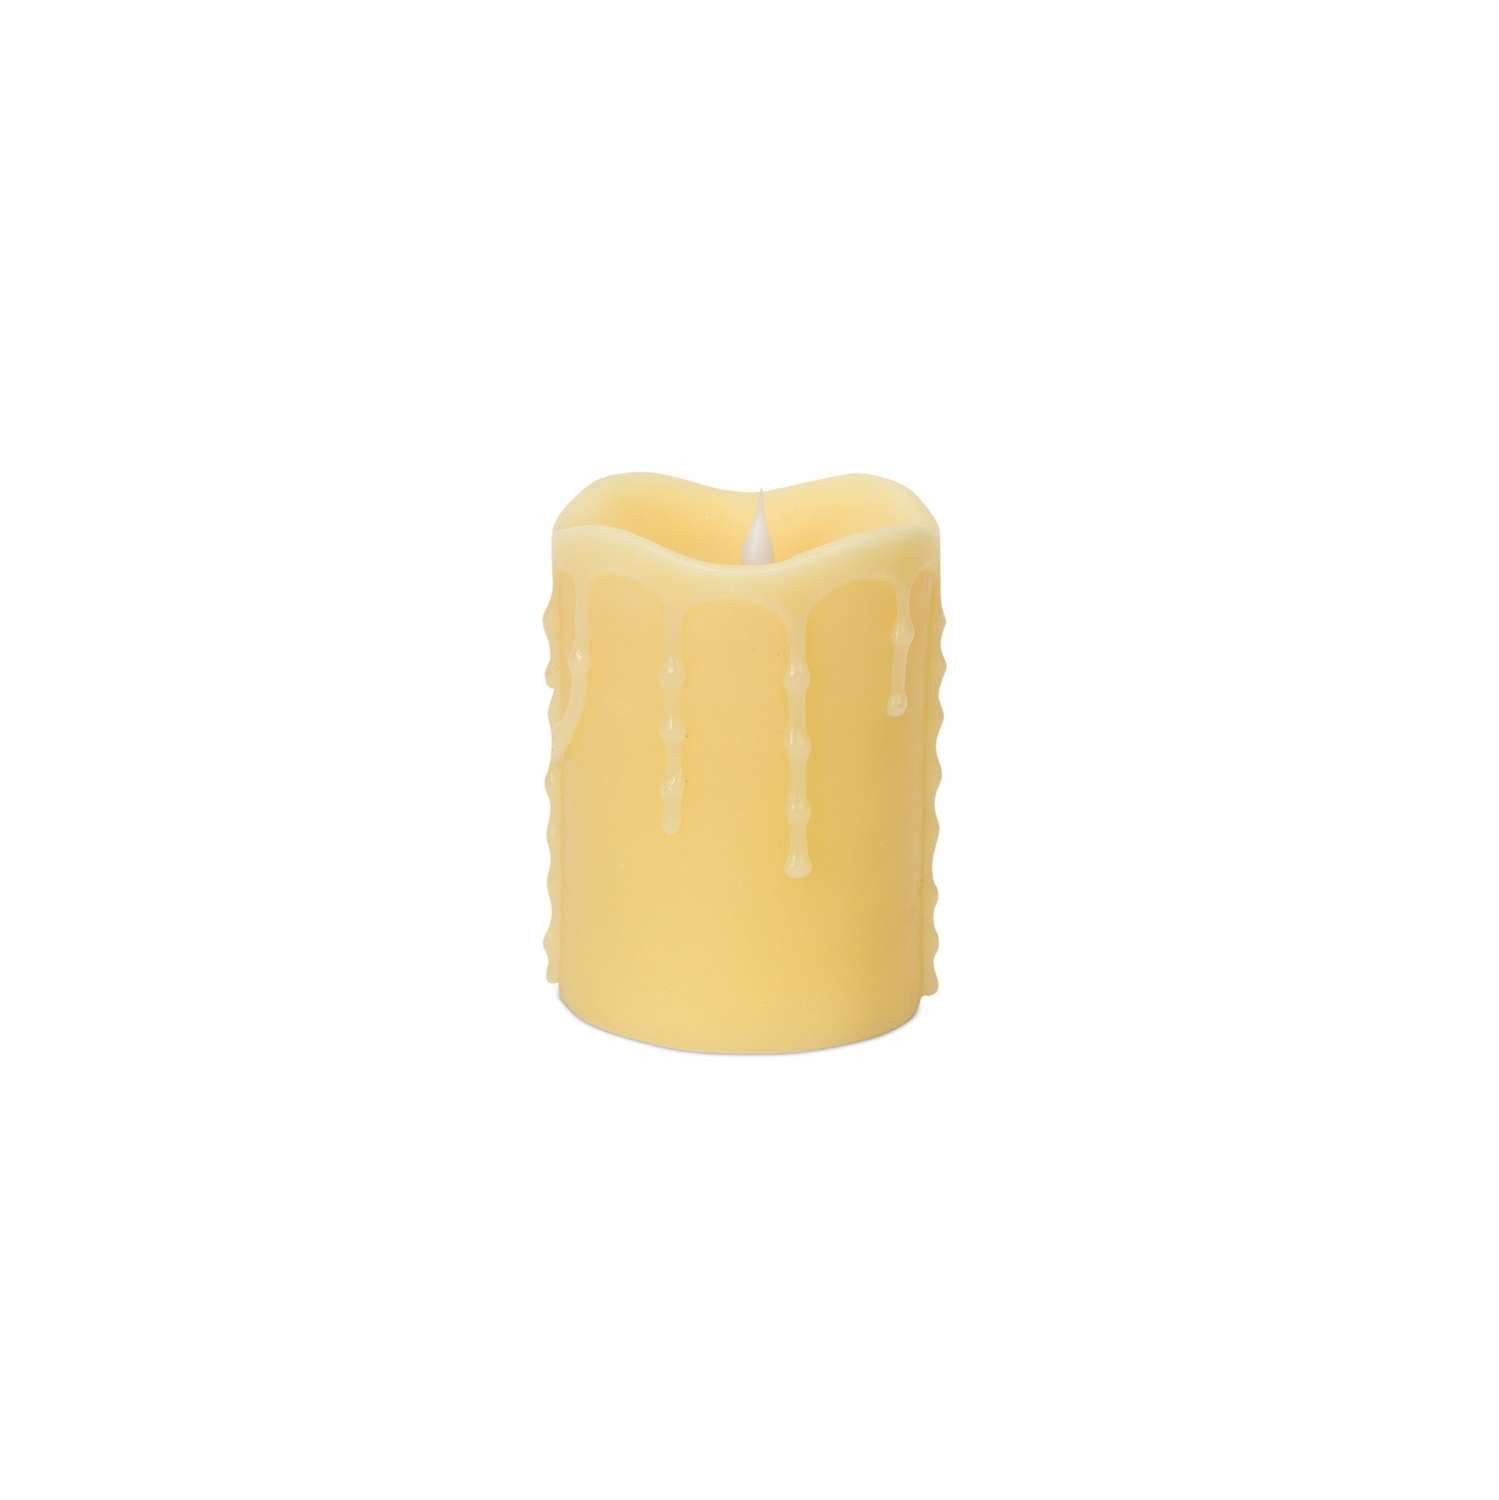 5.25" Battery Operated Ivory Flameless LED Lighted Pillar Candle with Moving Flame